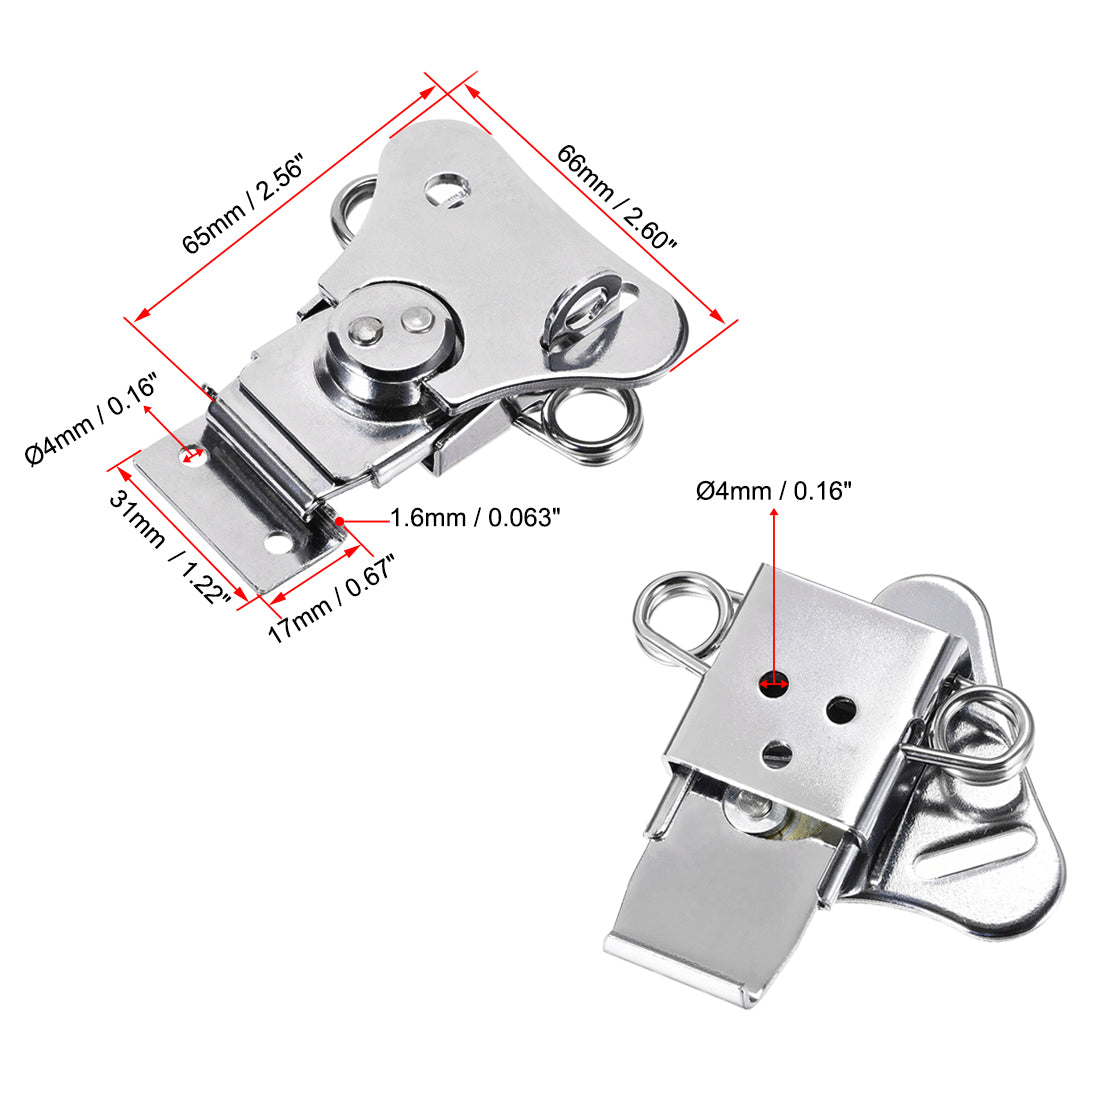 uxcell Uxcell 2.56-inch Iron Spring Loaded Butterfly Twist Latch Keeper Toggle Clamp with Keyhole - 3 Pcs (Silver)